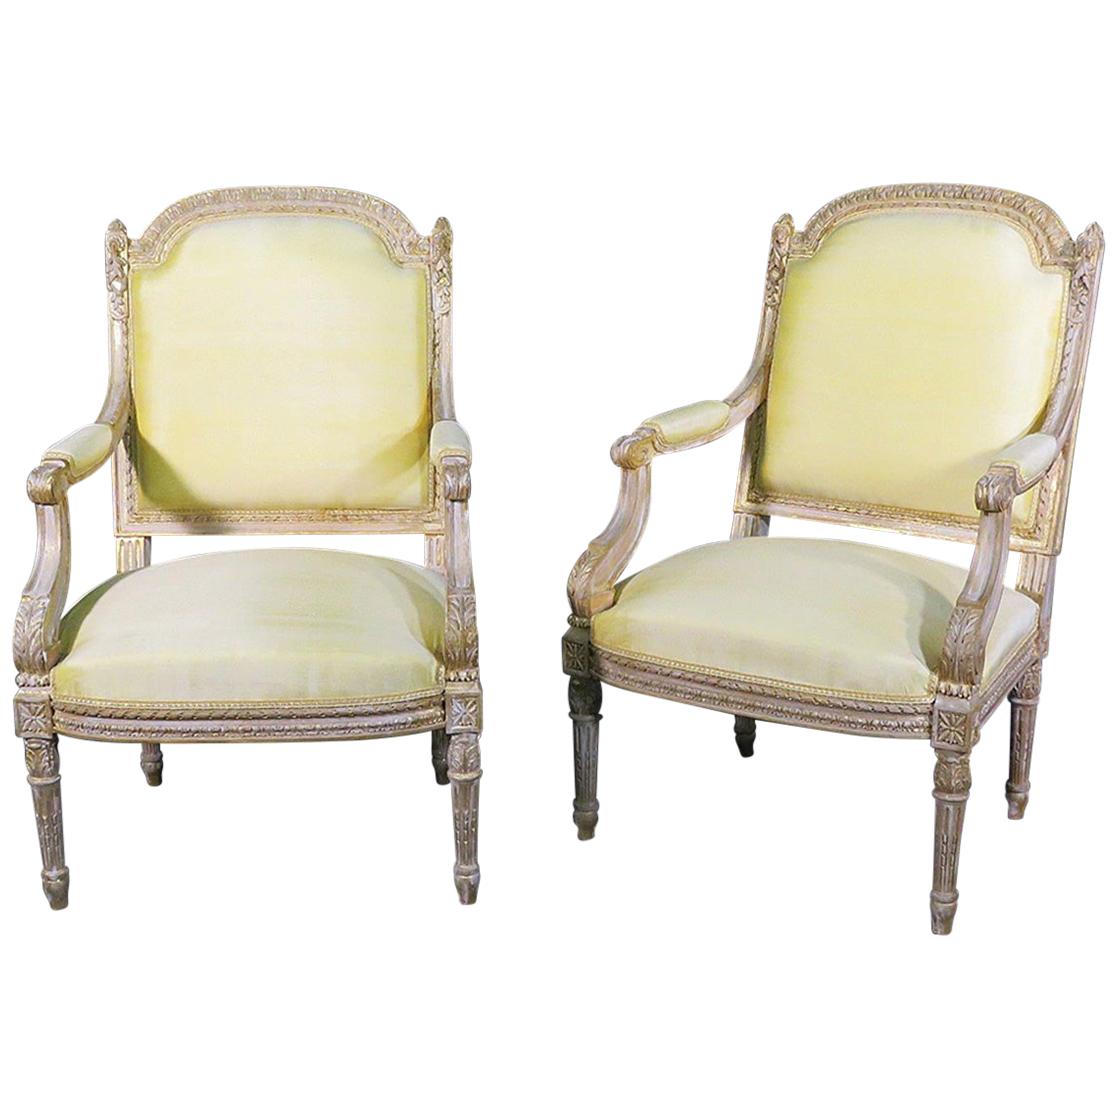 Beautiful Carved White Washed French Louis XVI Fauteuils Open Armchairs